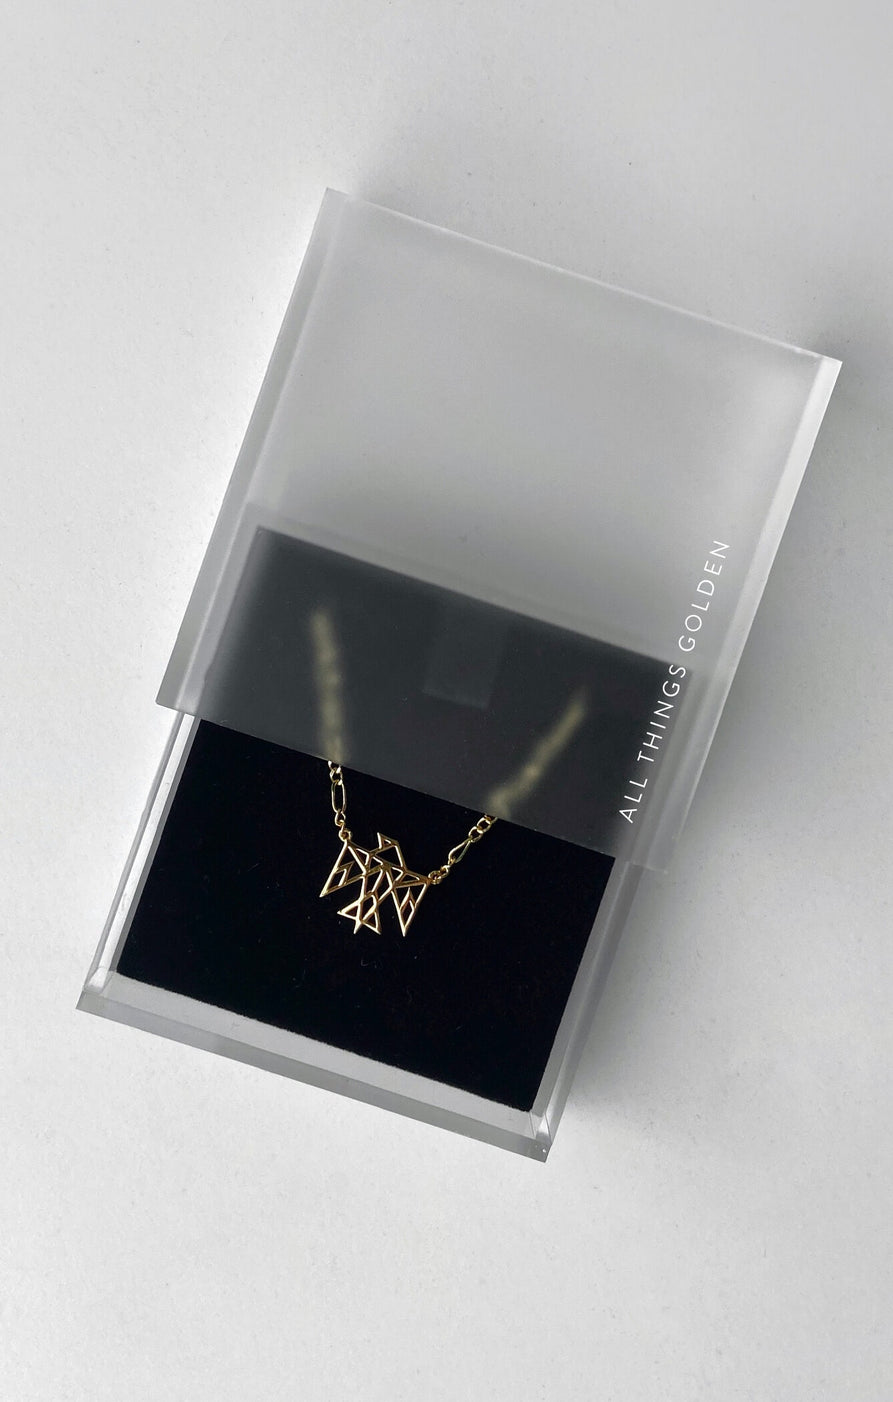 THE SIGNATURE NECKLACE - GOLD